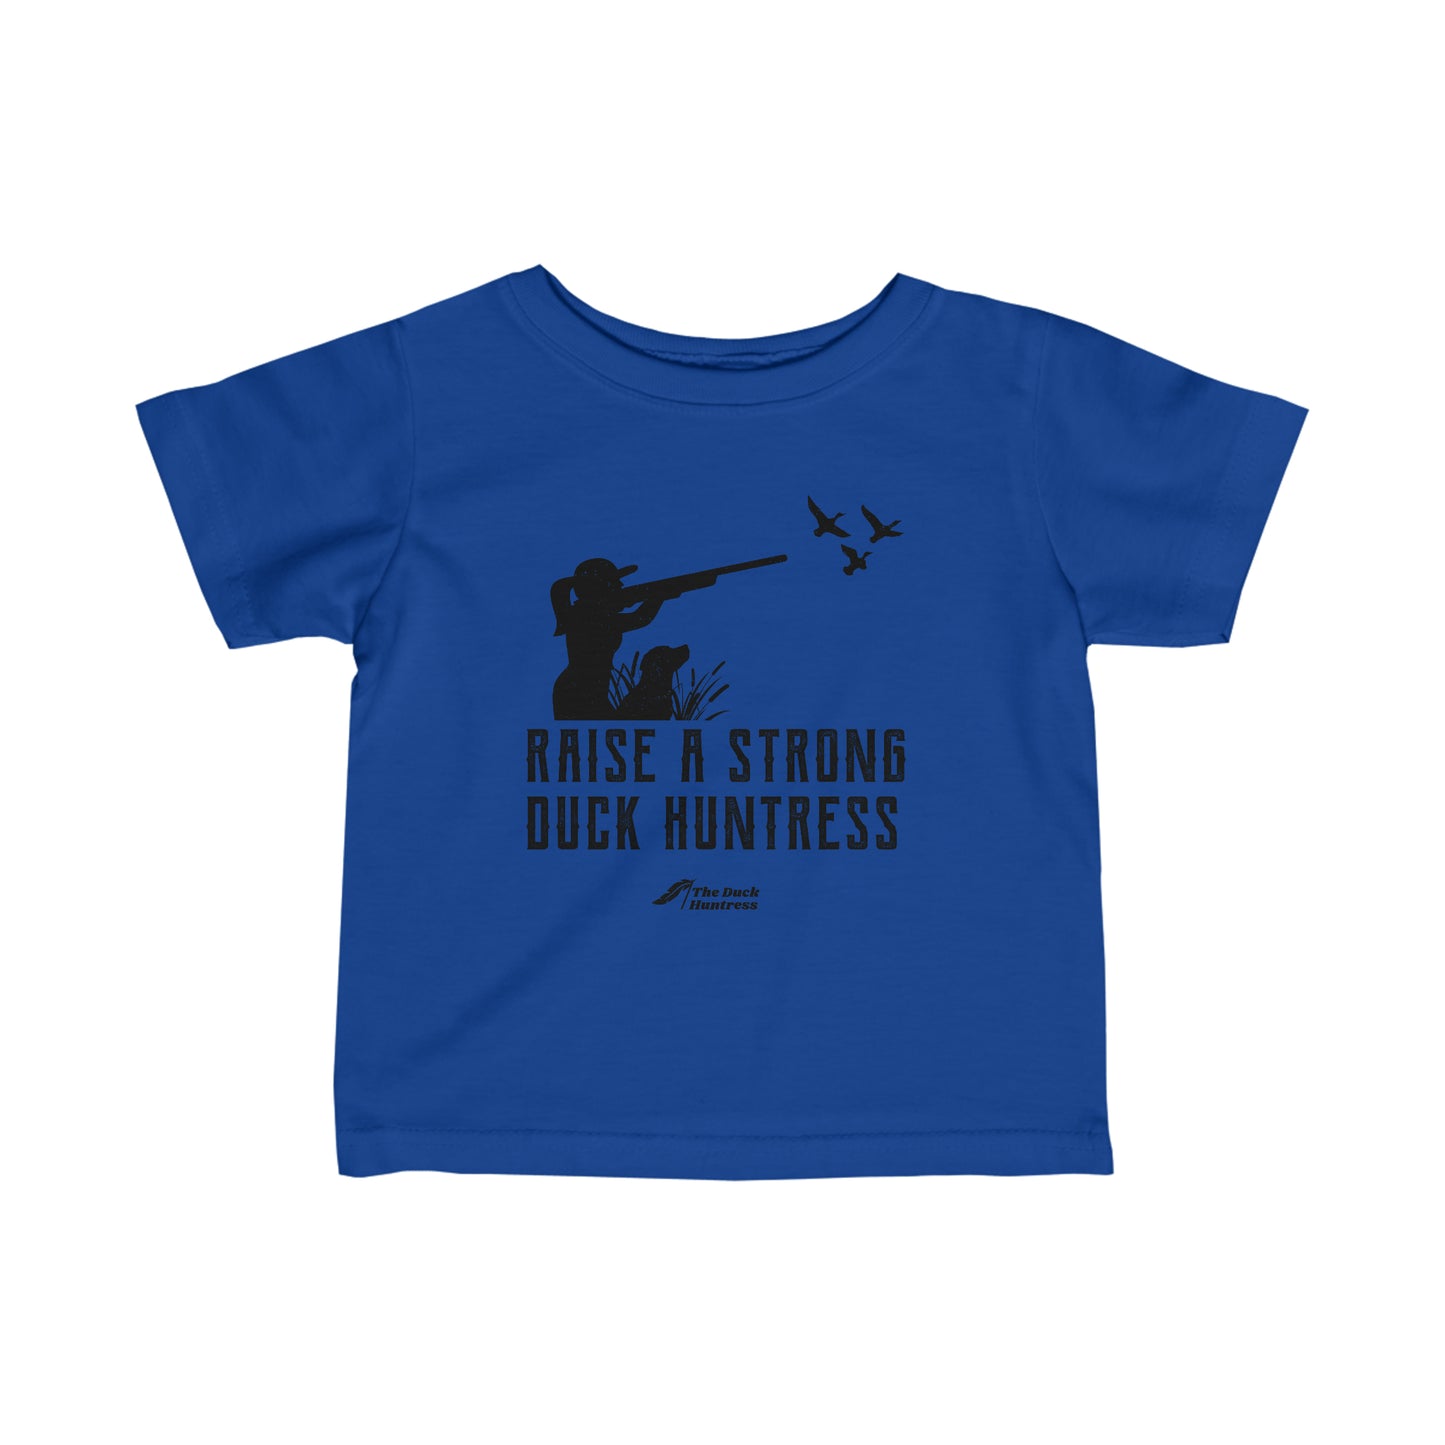 DH Raise Strong Baby Tee